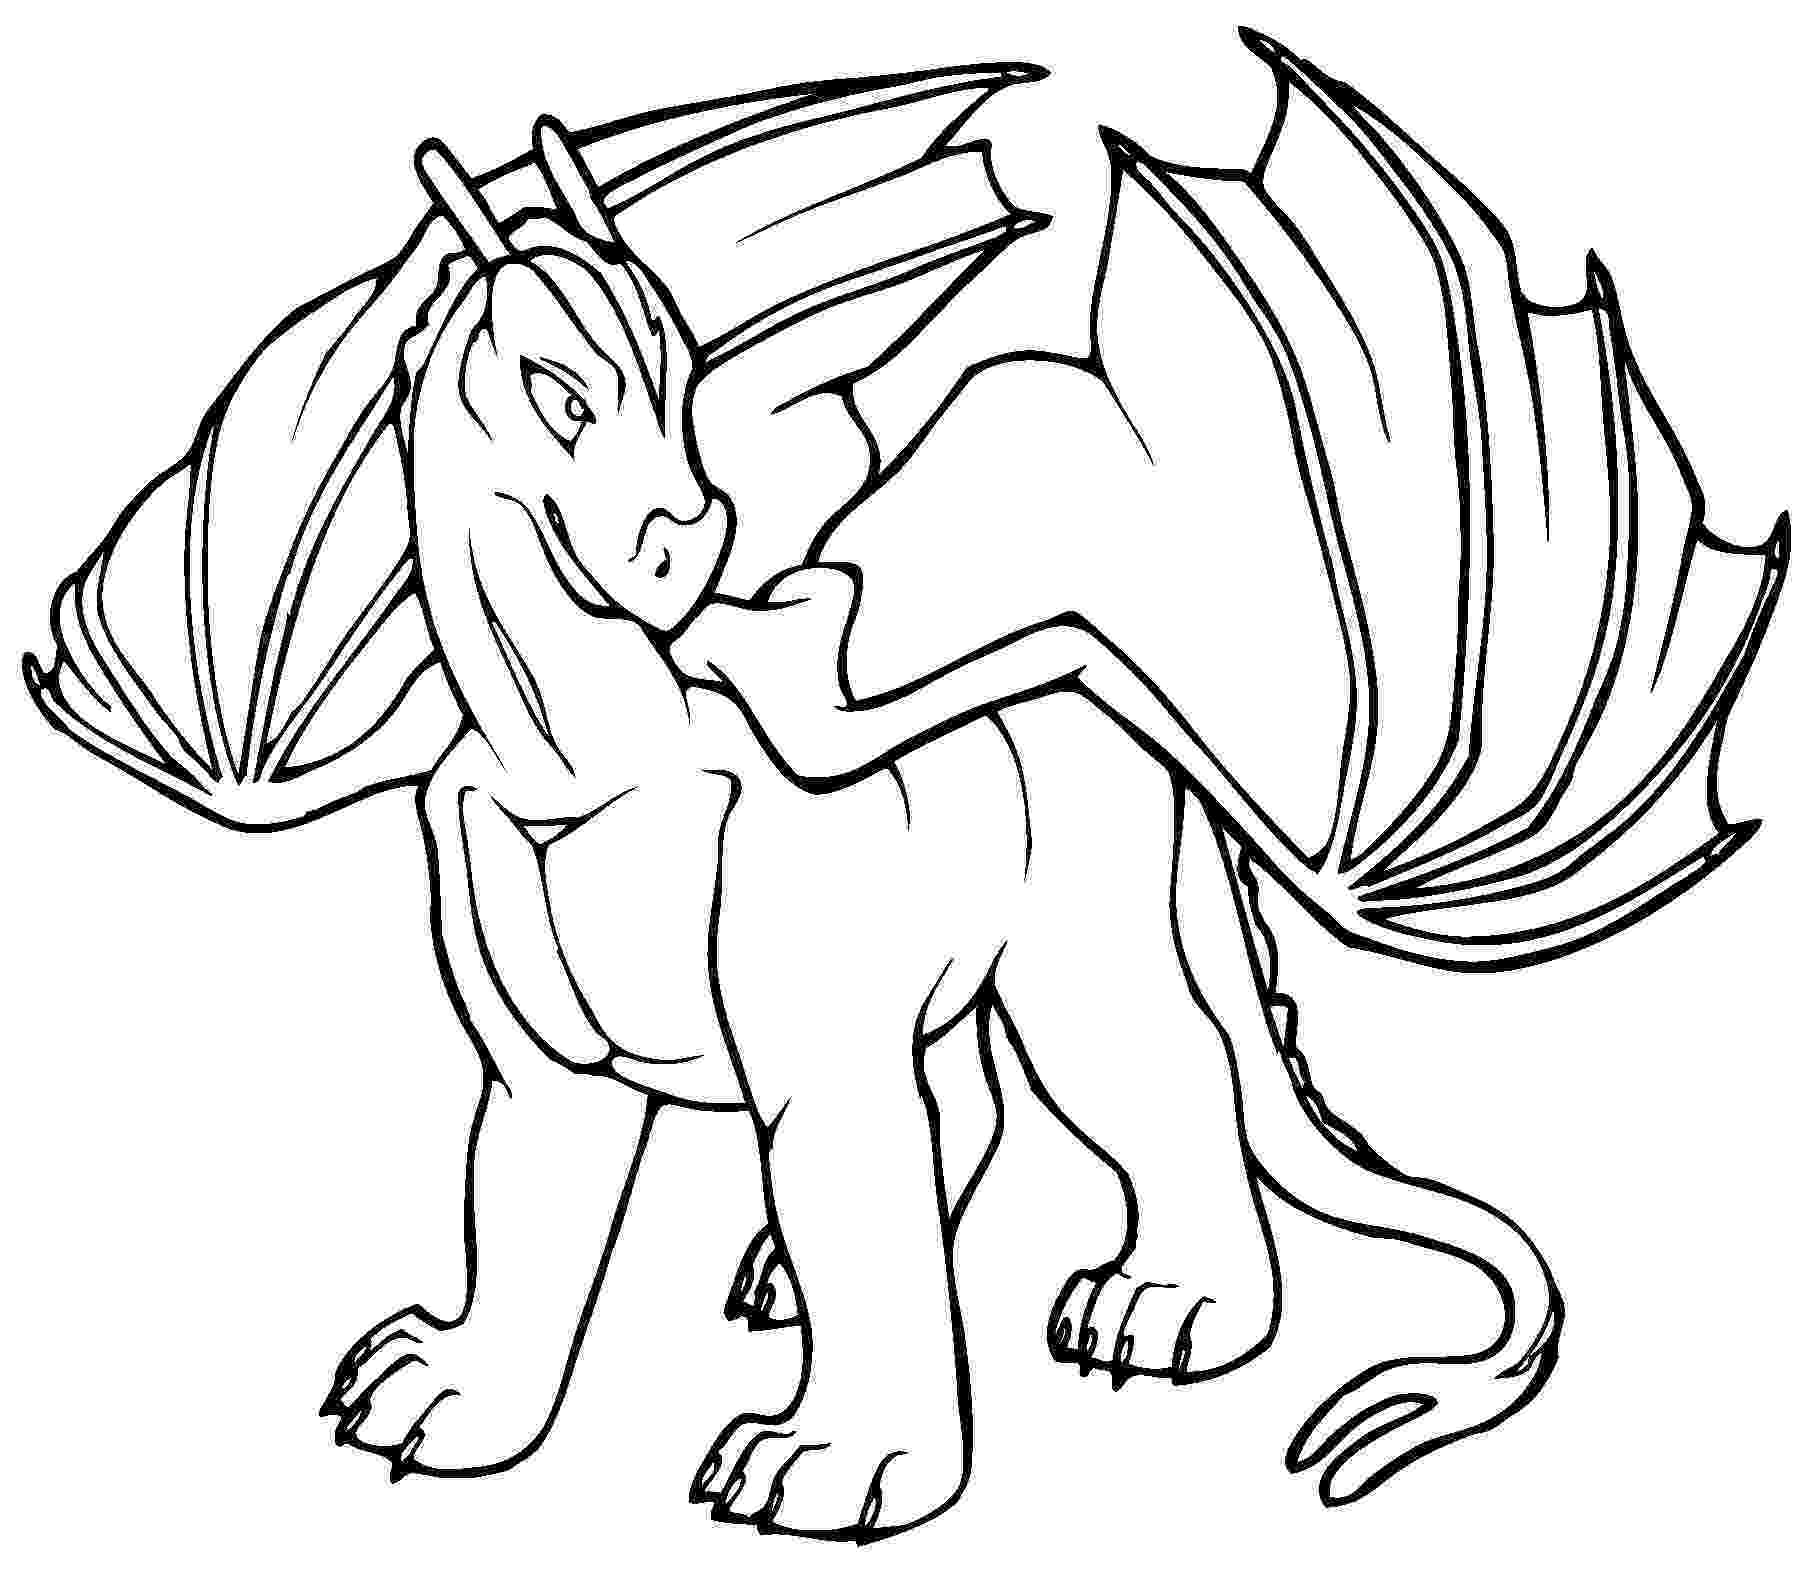 mythical creatures coloring pages mythical creature coloring pages coloring book area best pages creatures coloring mythical 